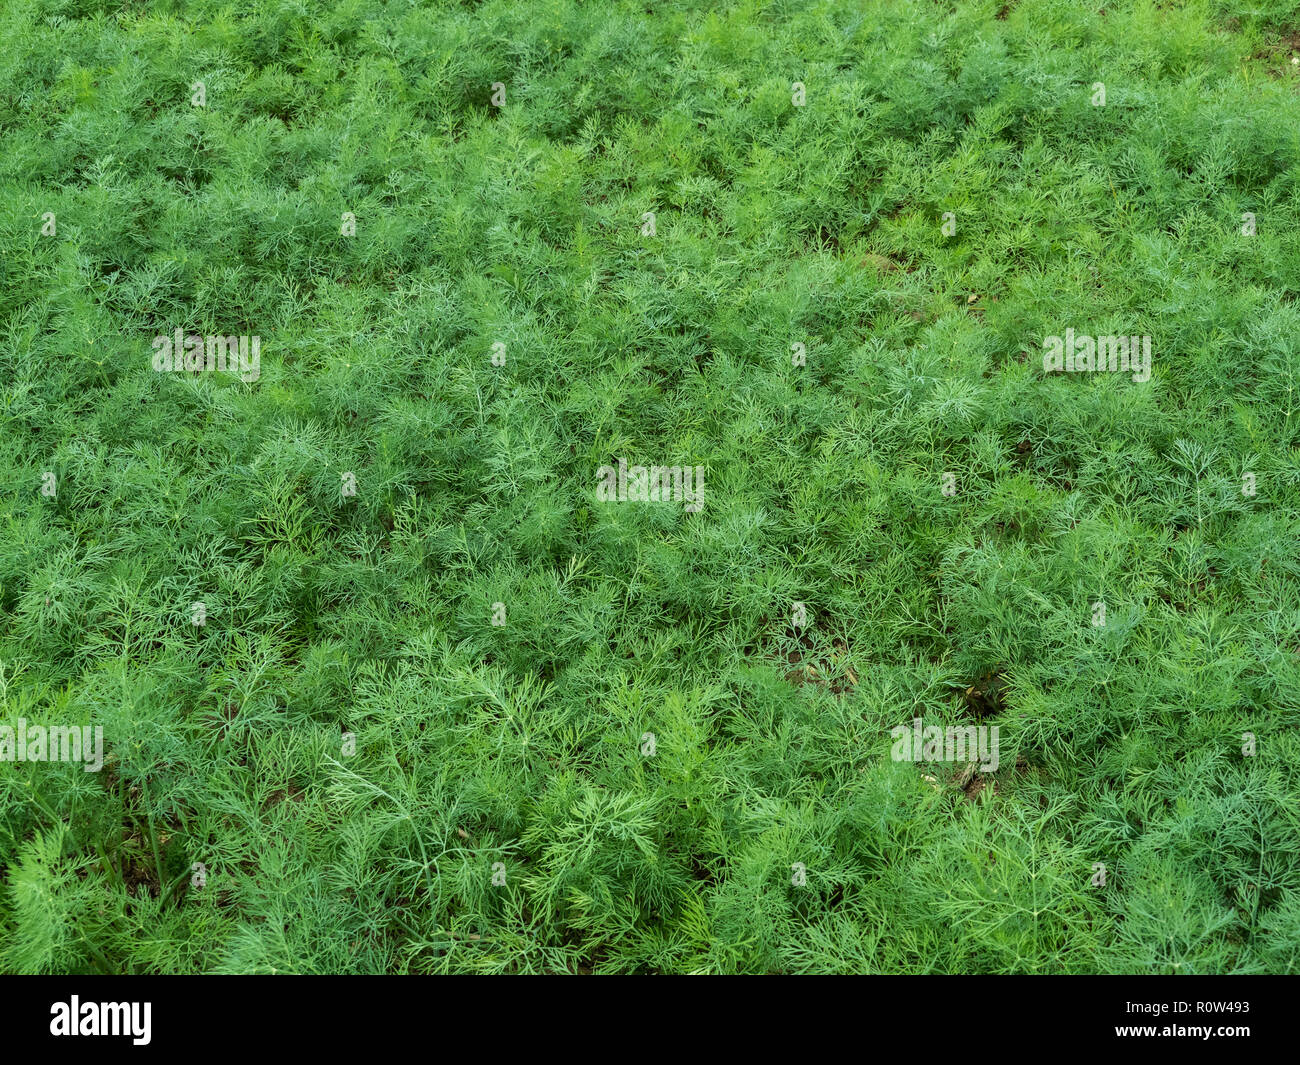 A close up of a field scale crop of the culinary herb dill Stock Photo